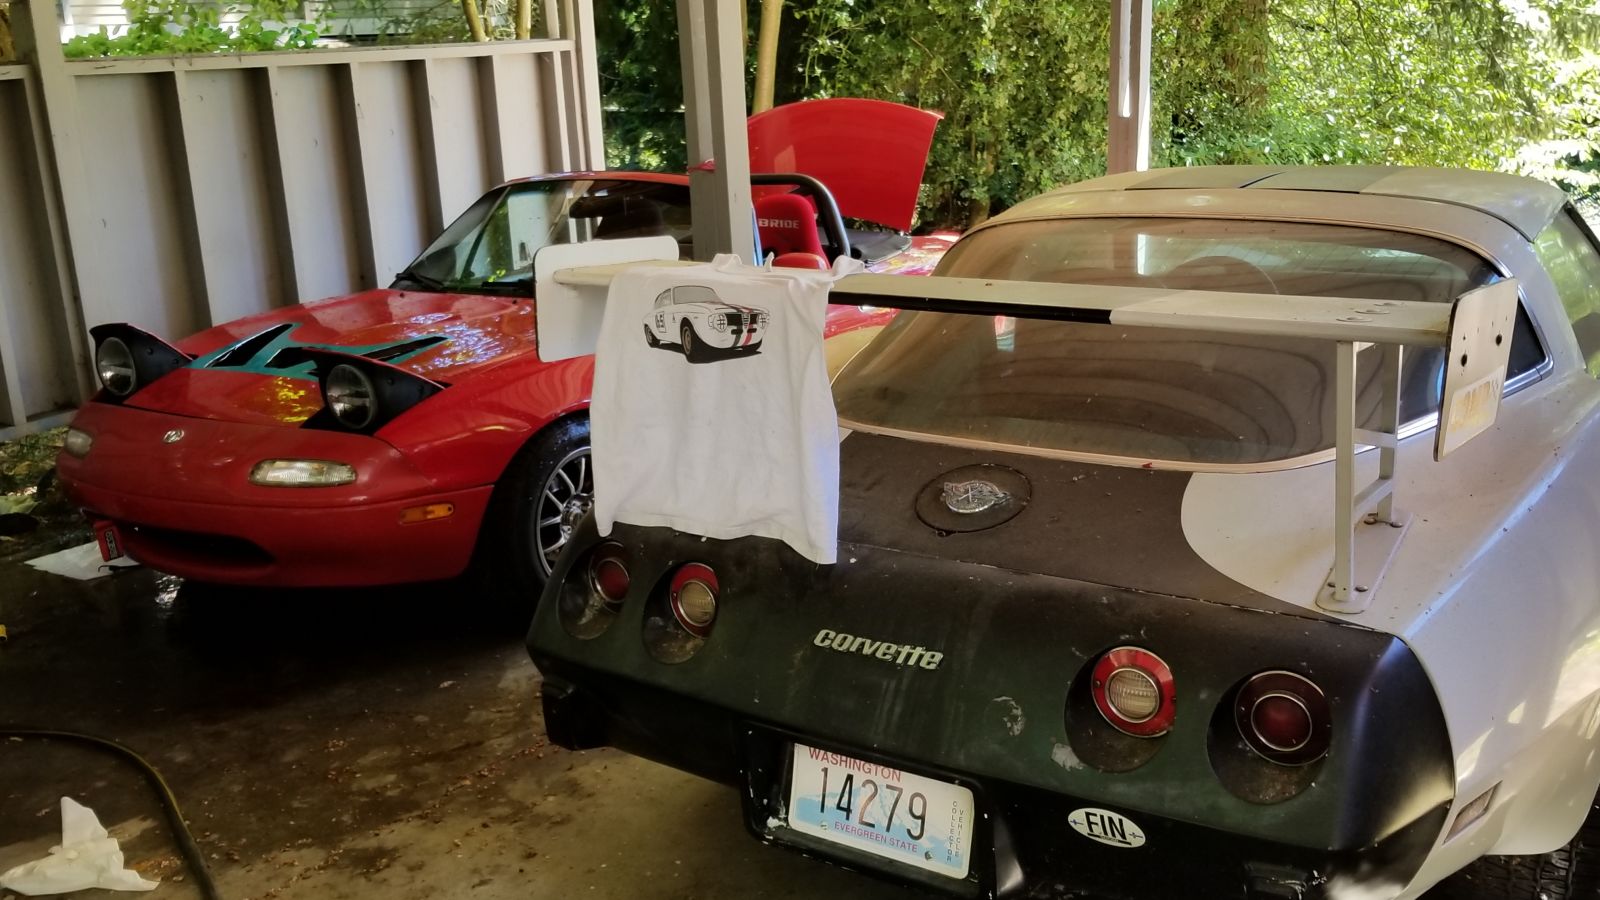 Hey archduke, I need another wrenching shirt. Where are the Miata’s at...? 